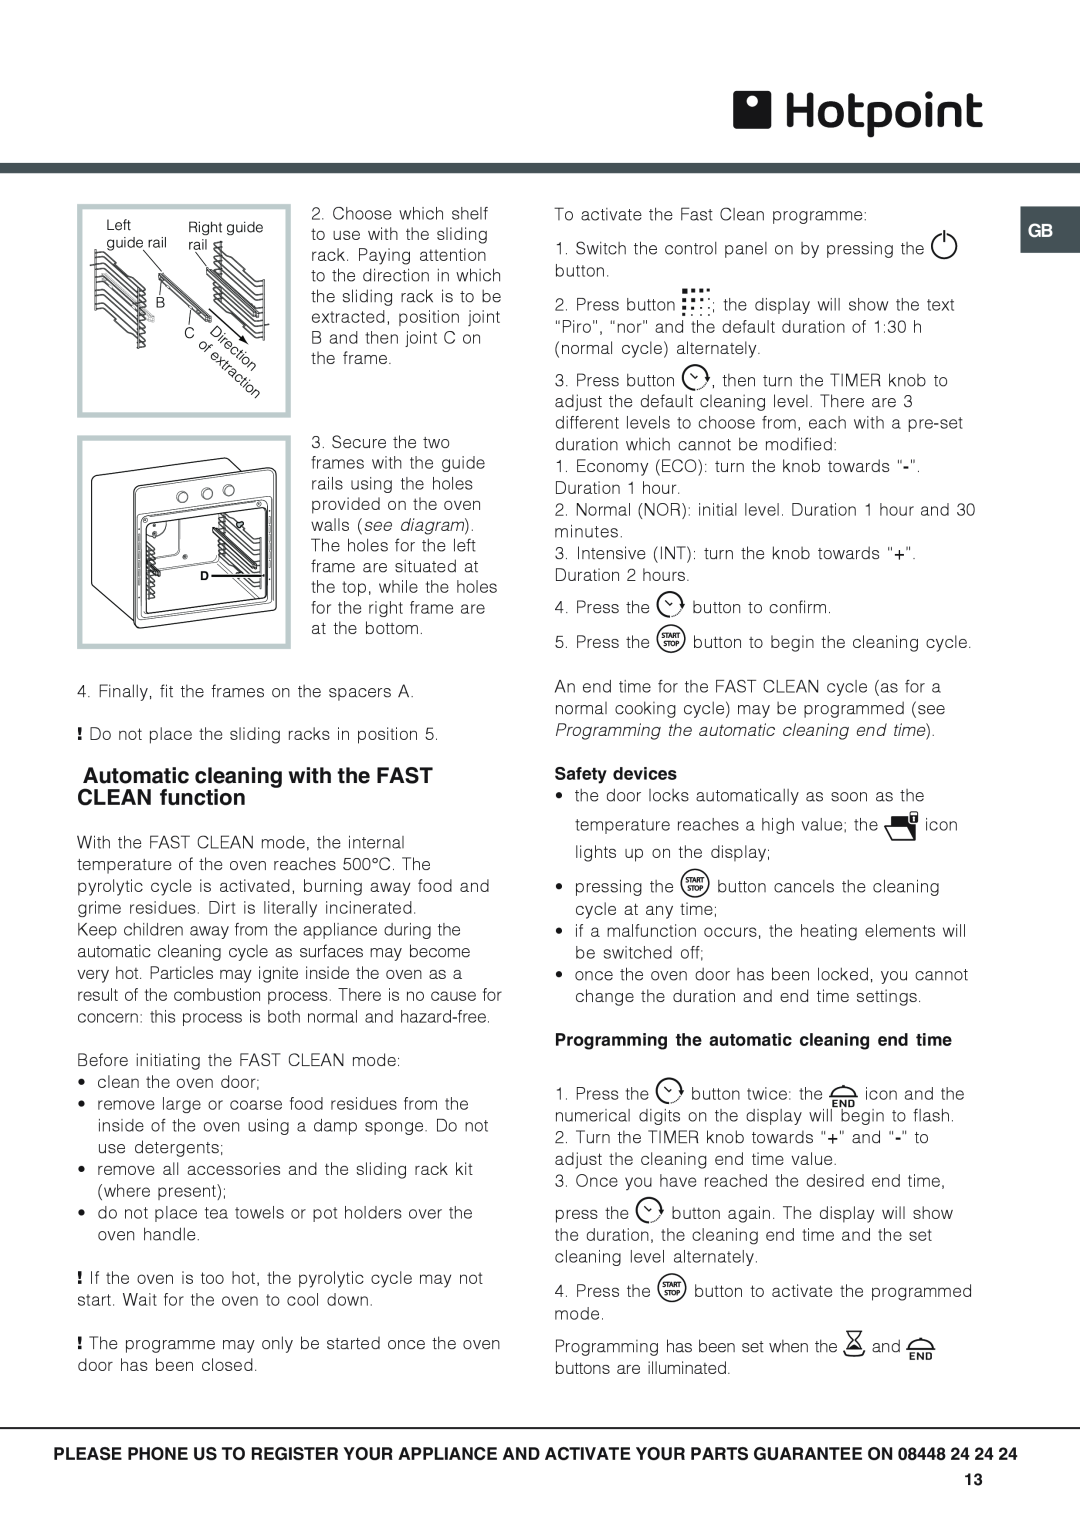 Hotpoint SX 896L PX manual Automatic cleaning with the FAST CLEAN function, walls see diagram, Safety devices 